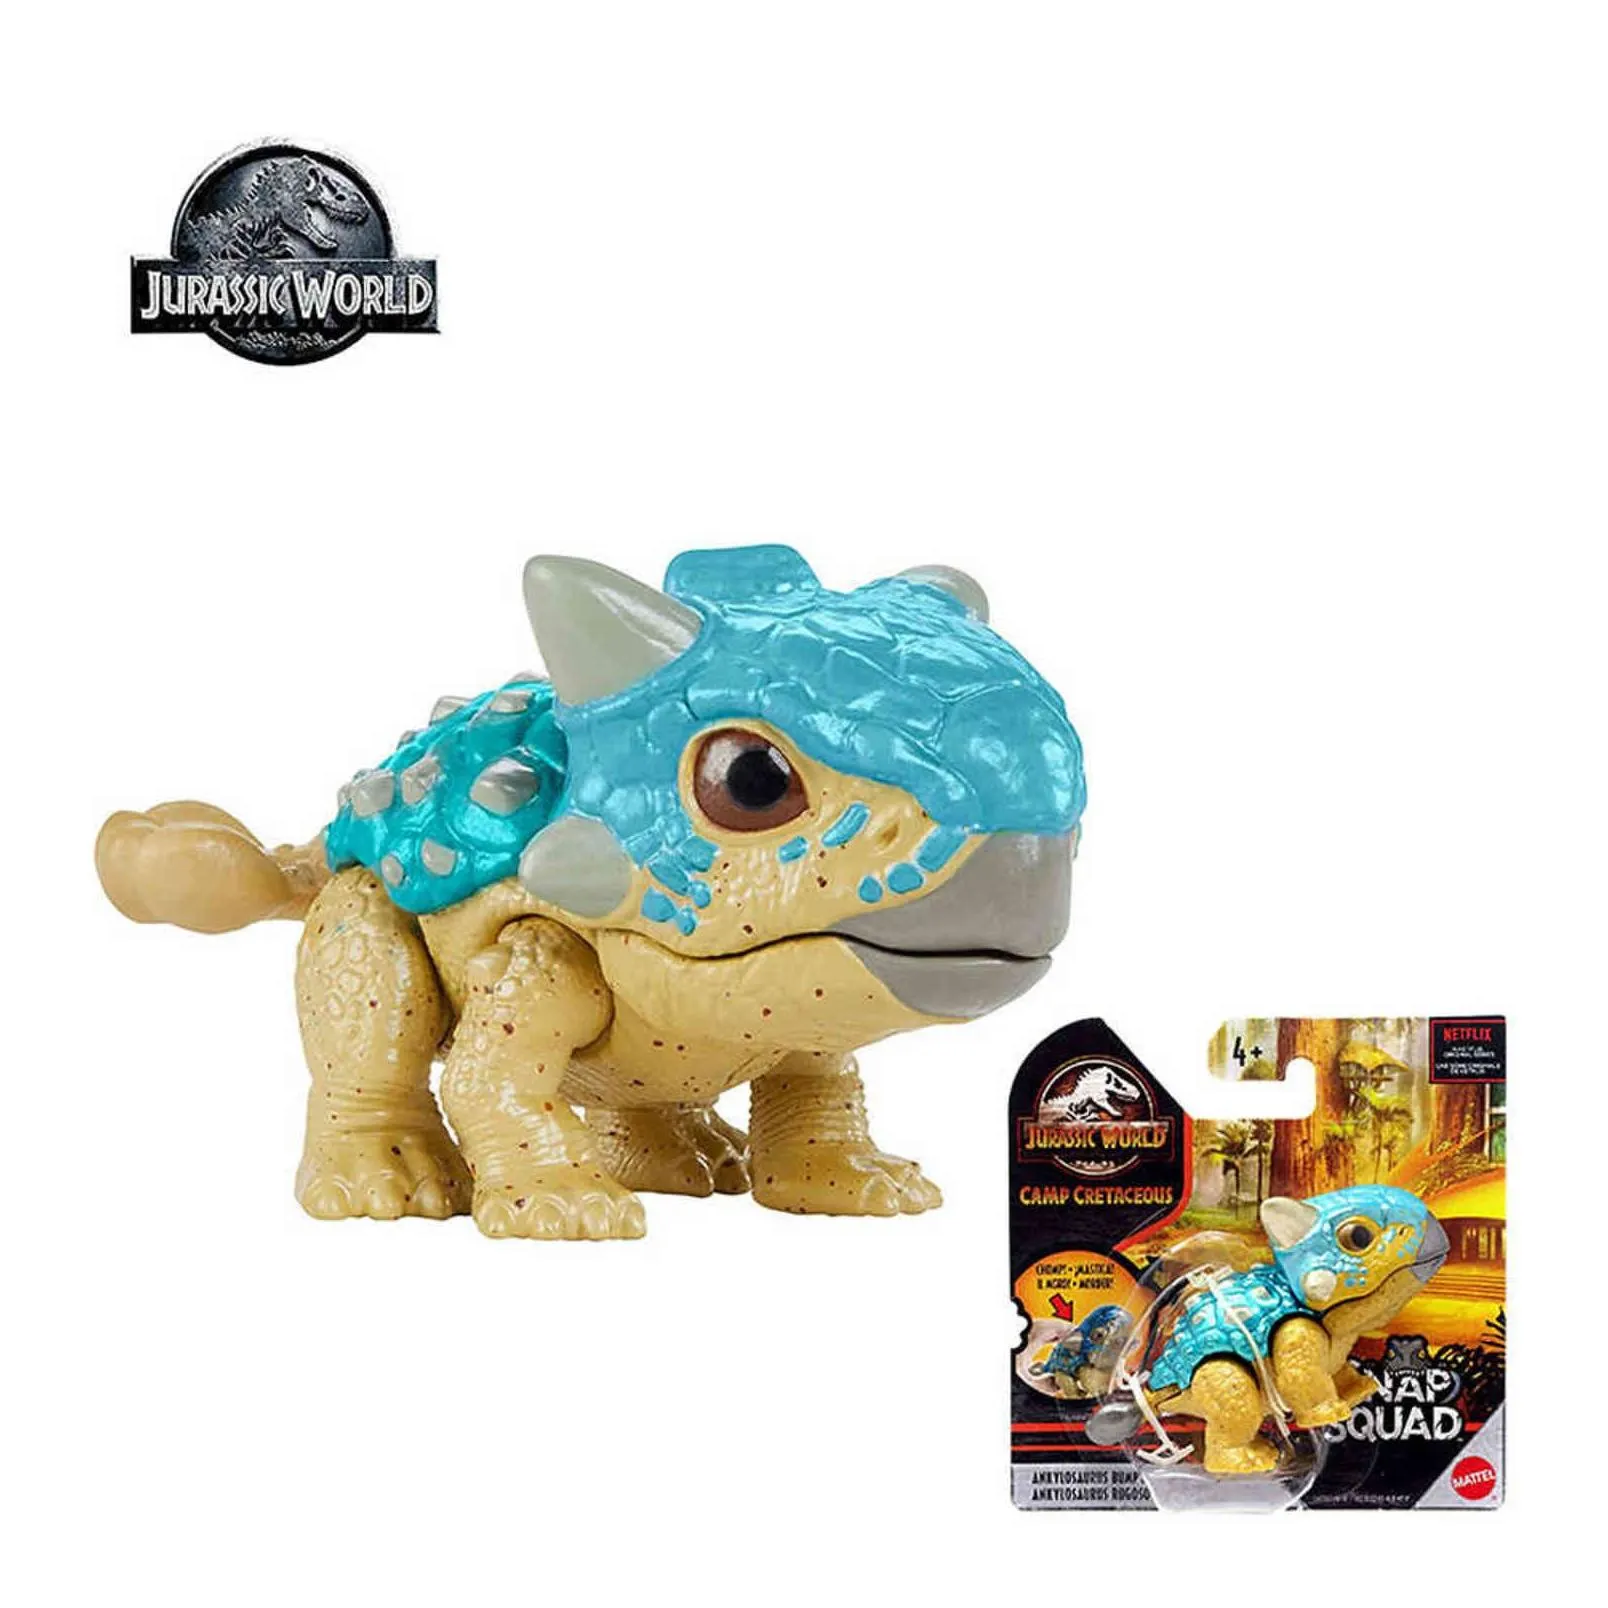 jurassic world dinosaur toys mini collectible snap squad fingers dinosaur action figure toy movable joint for kids gifts ggn26 x1106